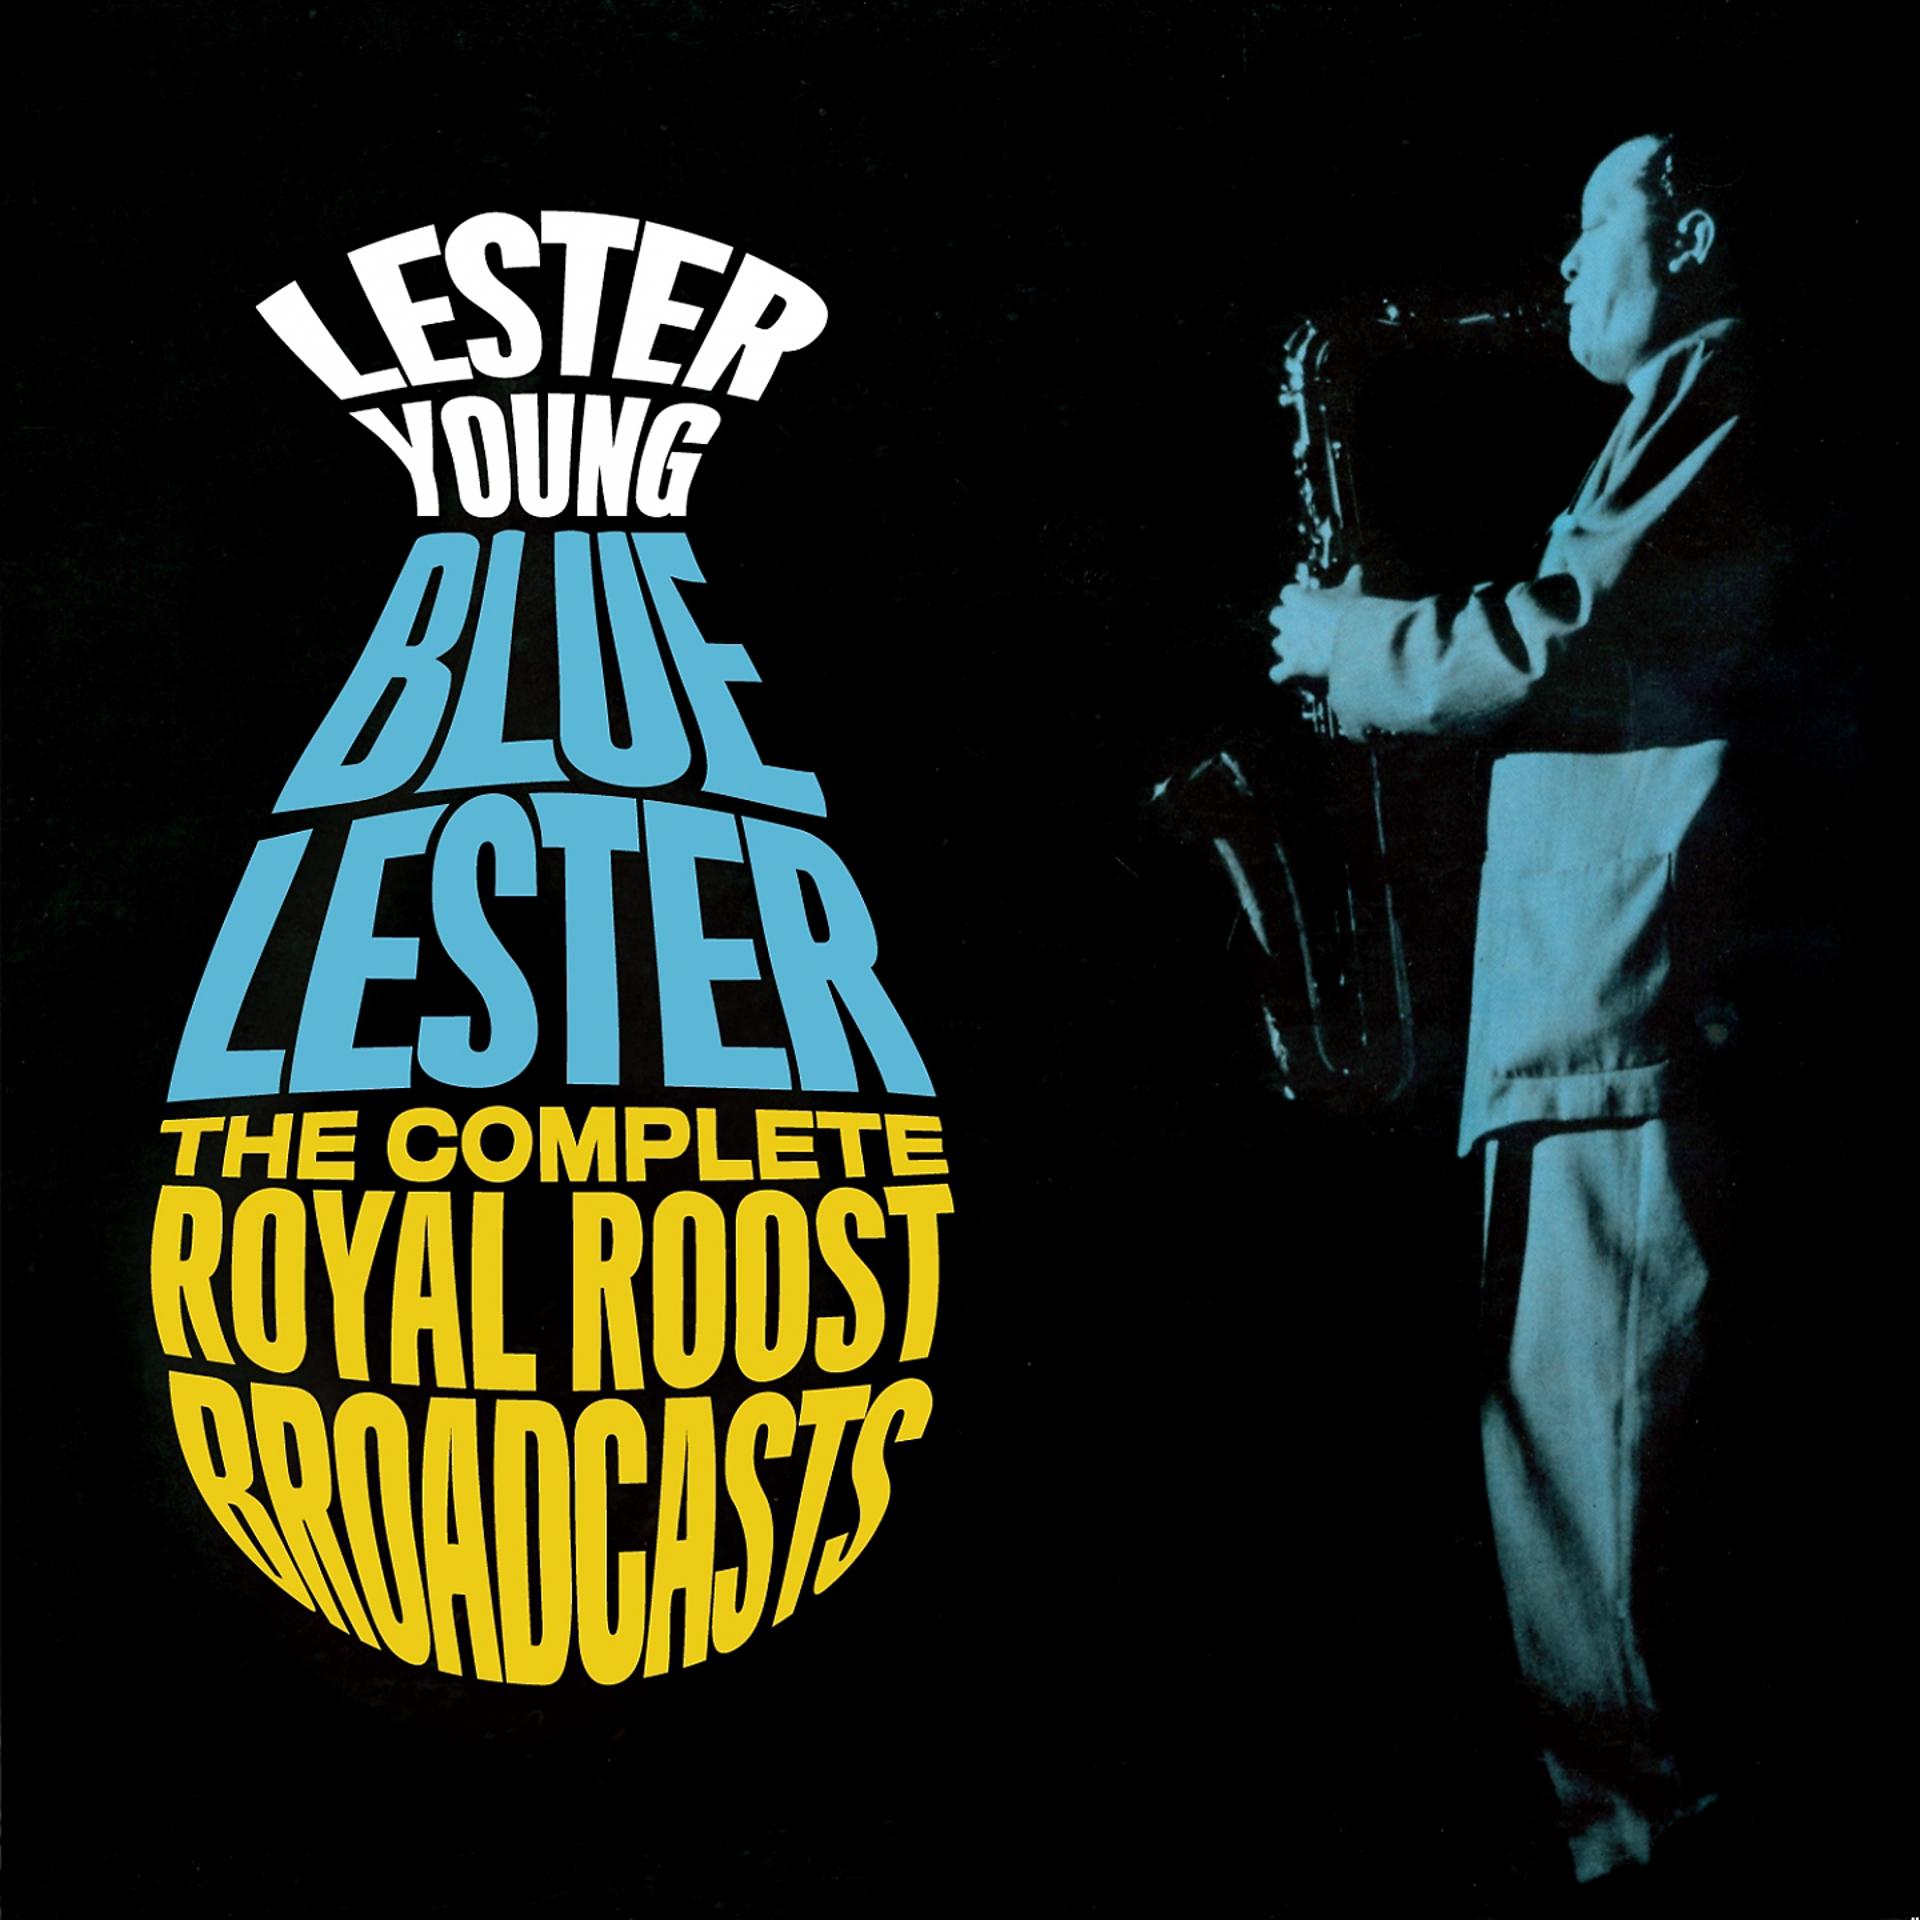 Постер альбома Blue Lester: Complete Royal Roost Broadcasts